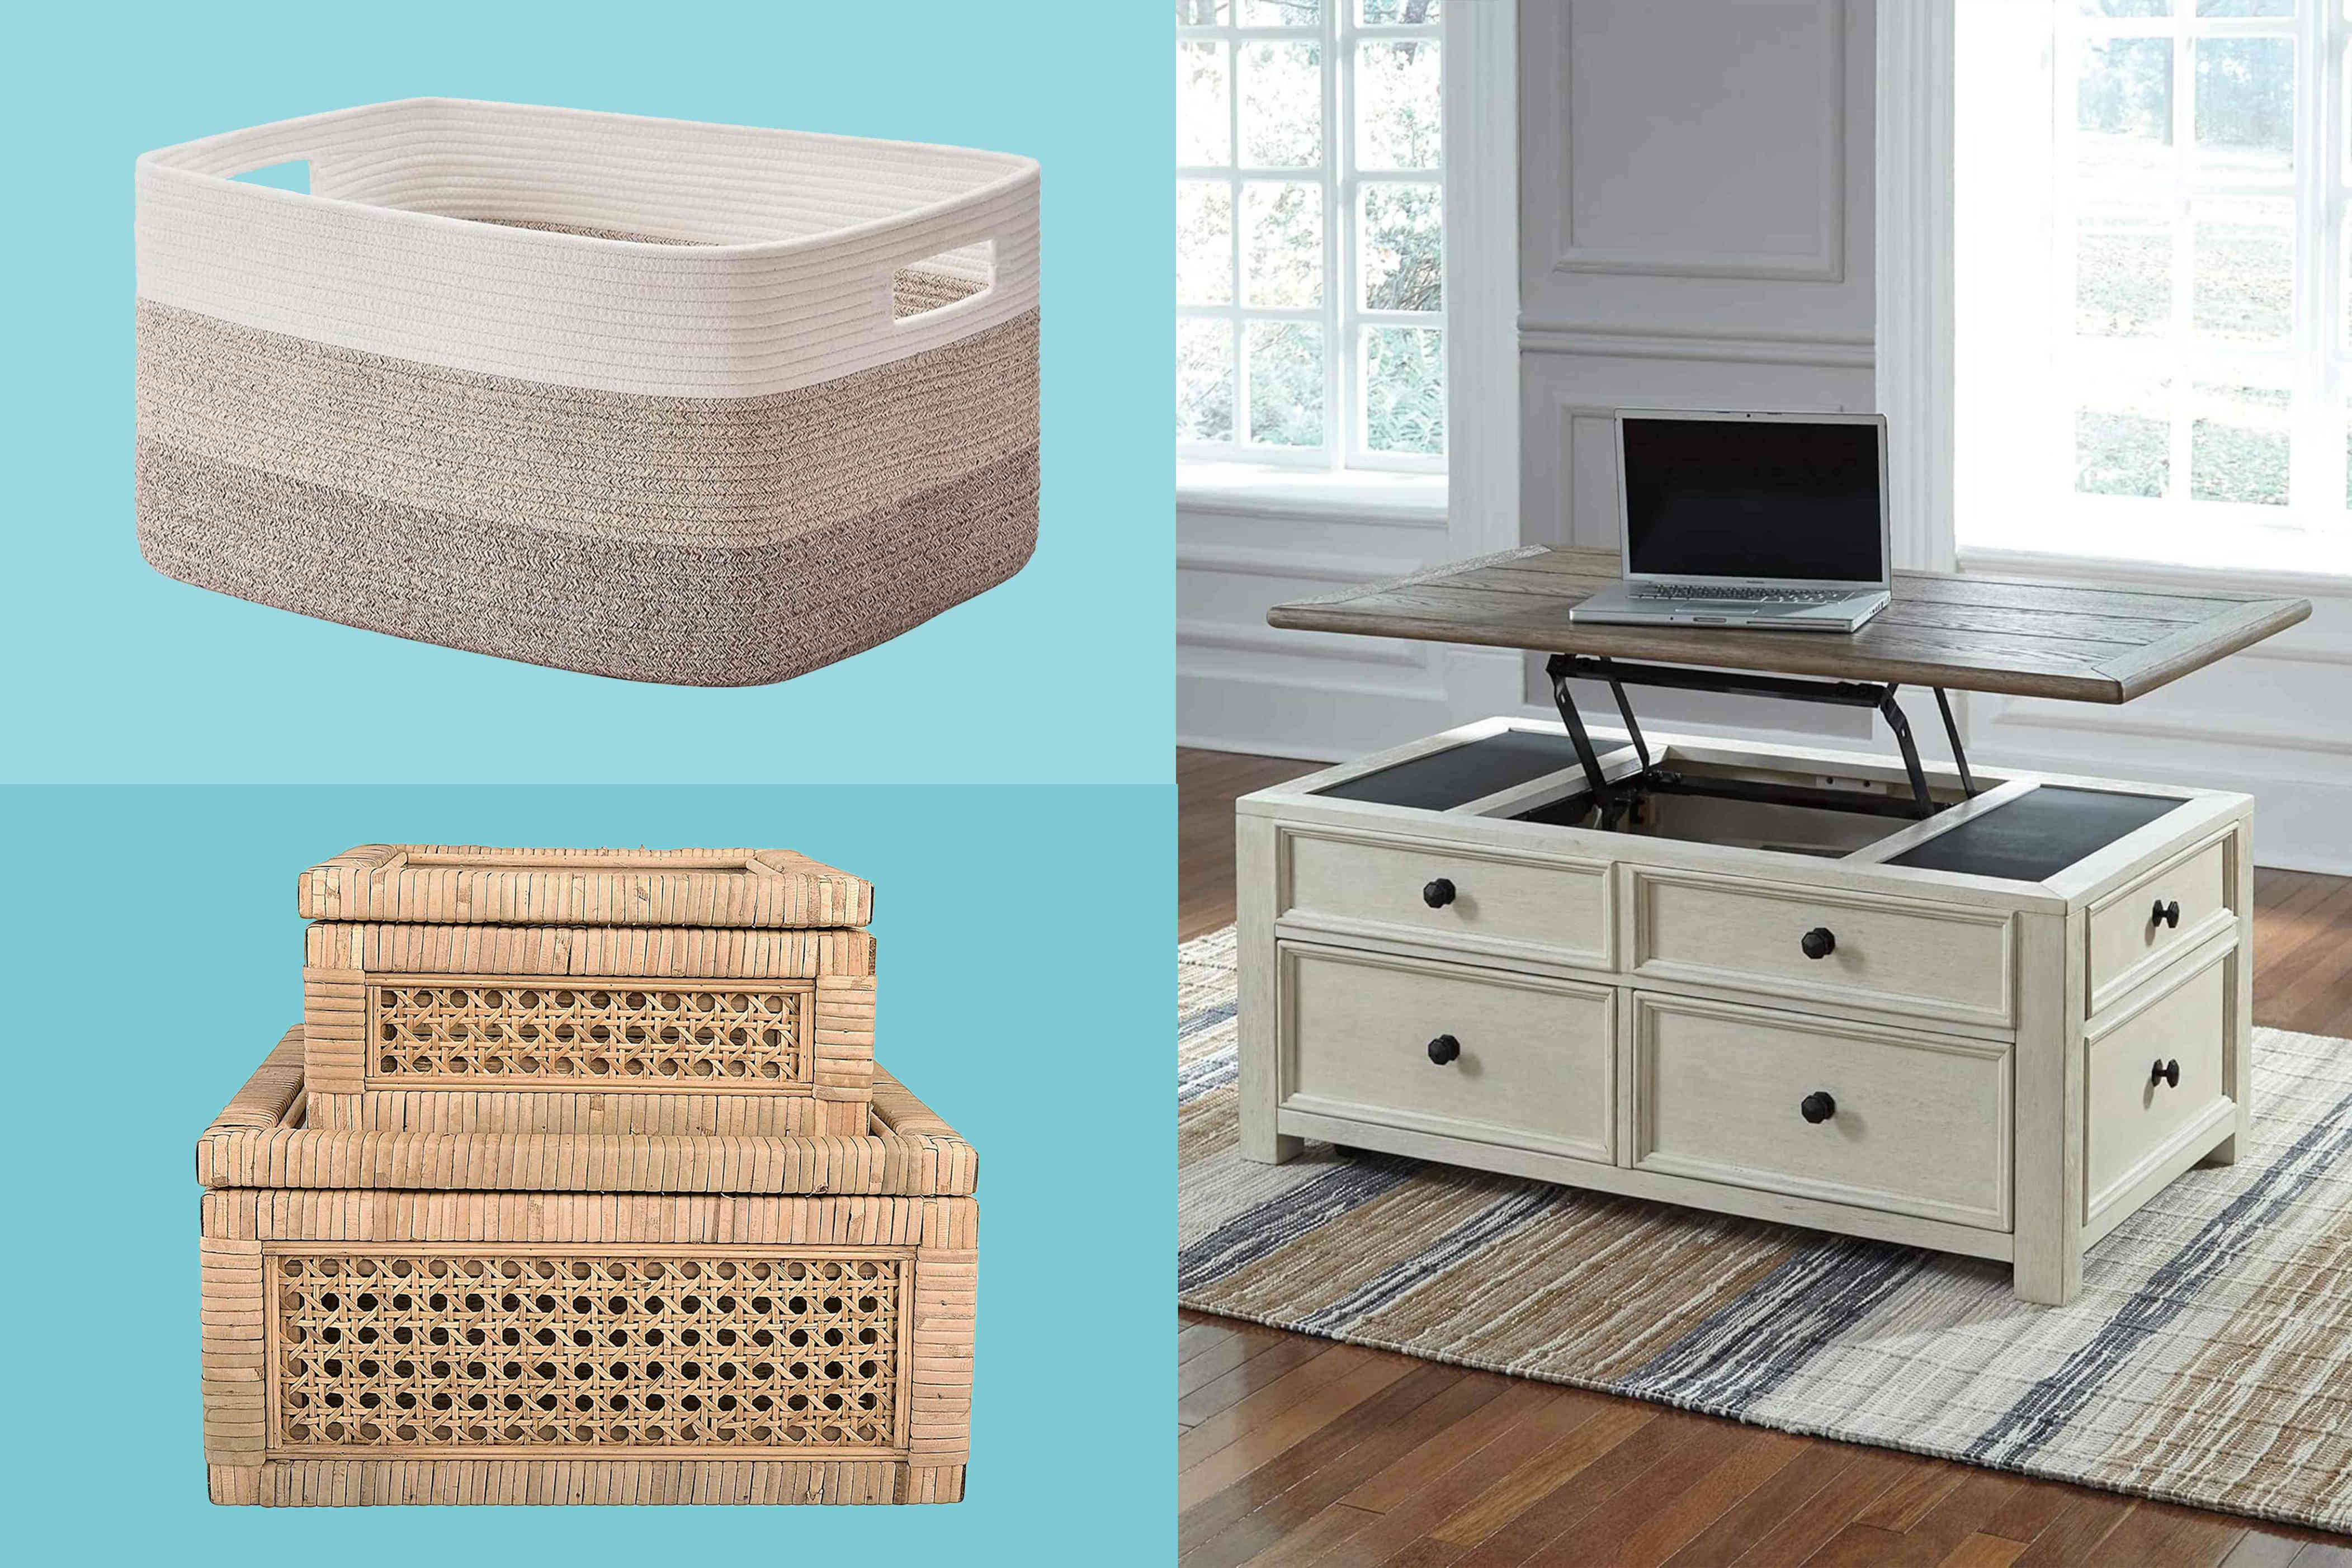 amazon, professional organizers reveal their favorite living room storage finds at amazon—and they’re all on sale